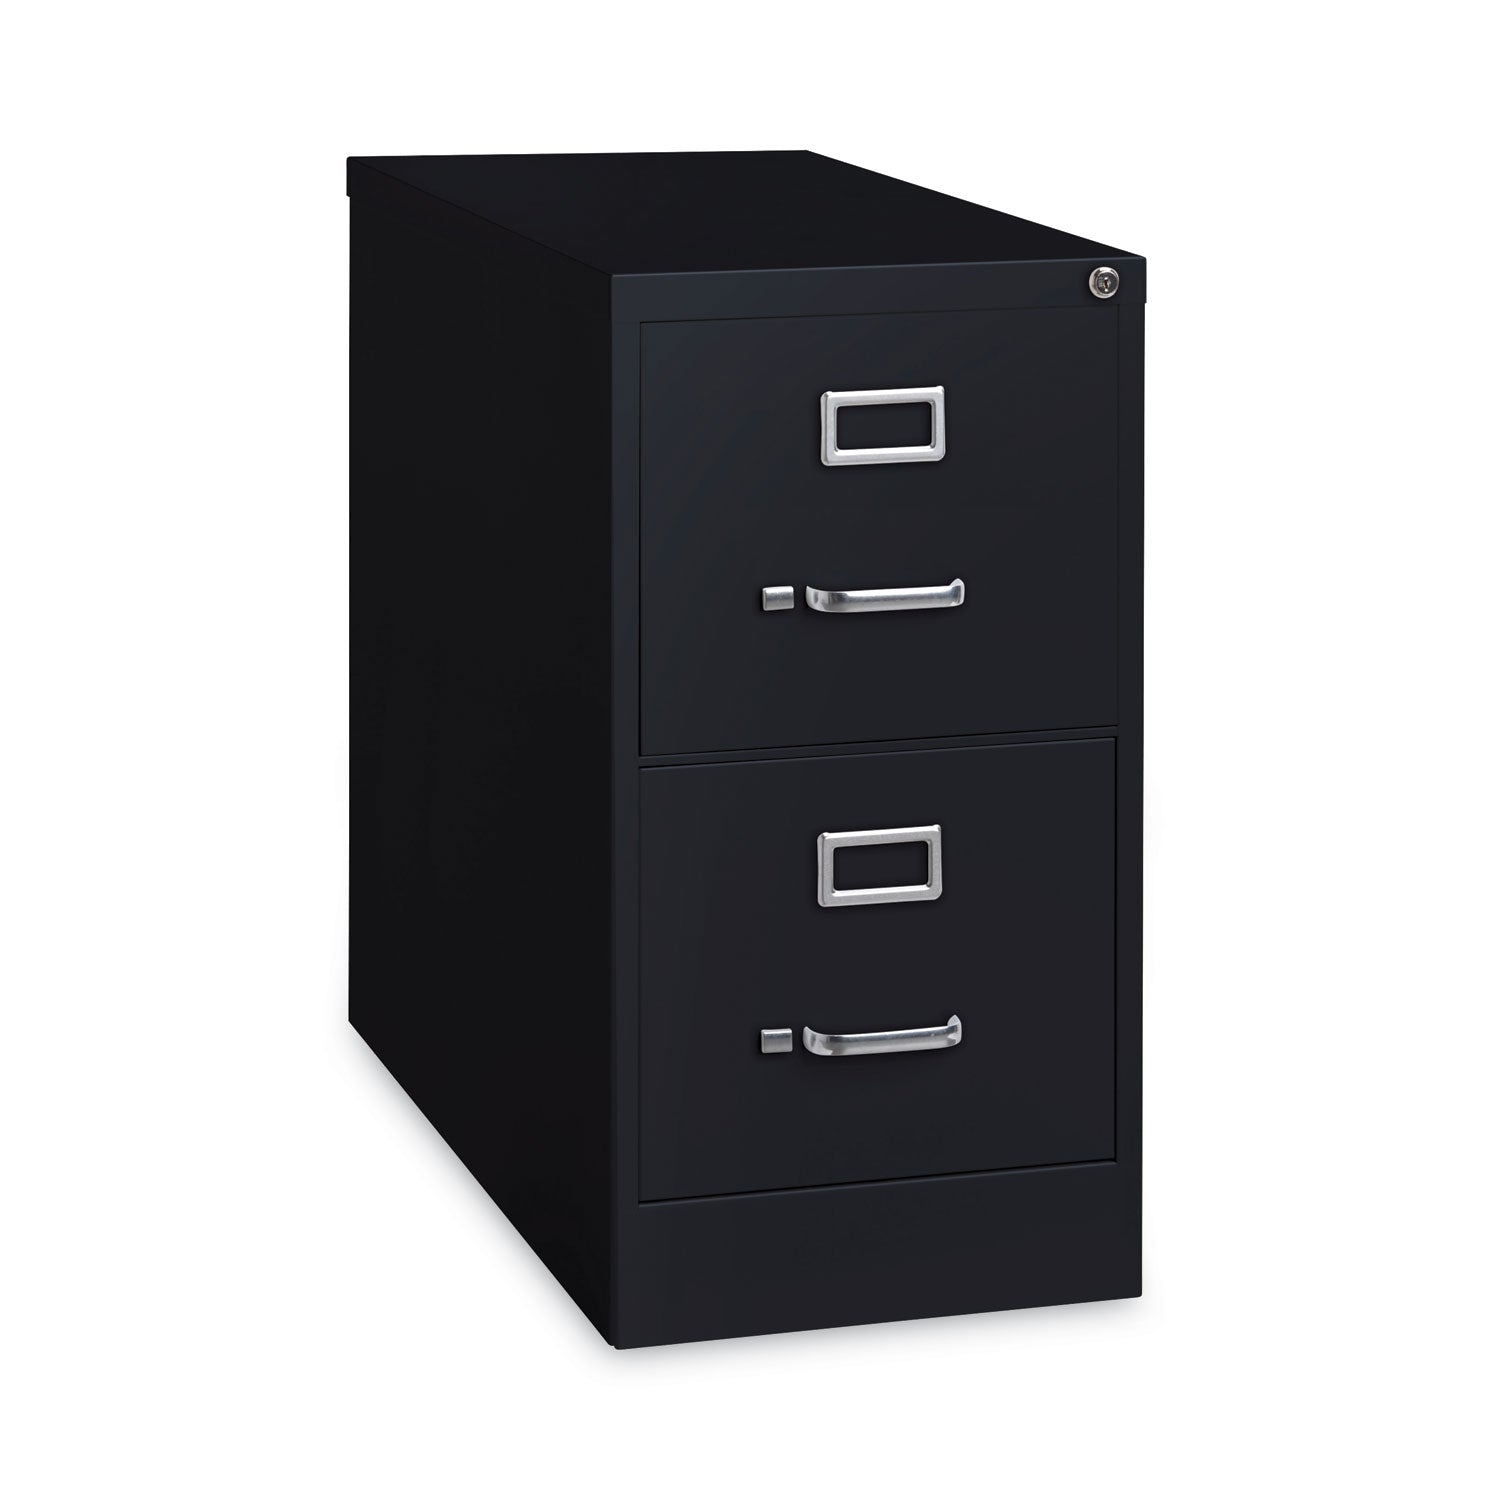 vertical-letter-file-cabinet-2-letter-size-file-drawers-black-15-x-265-x-2837_hid14101 - 5